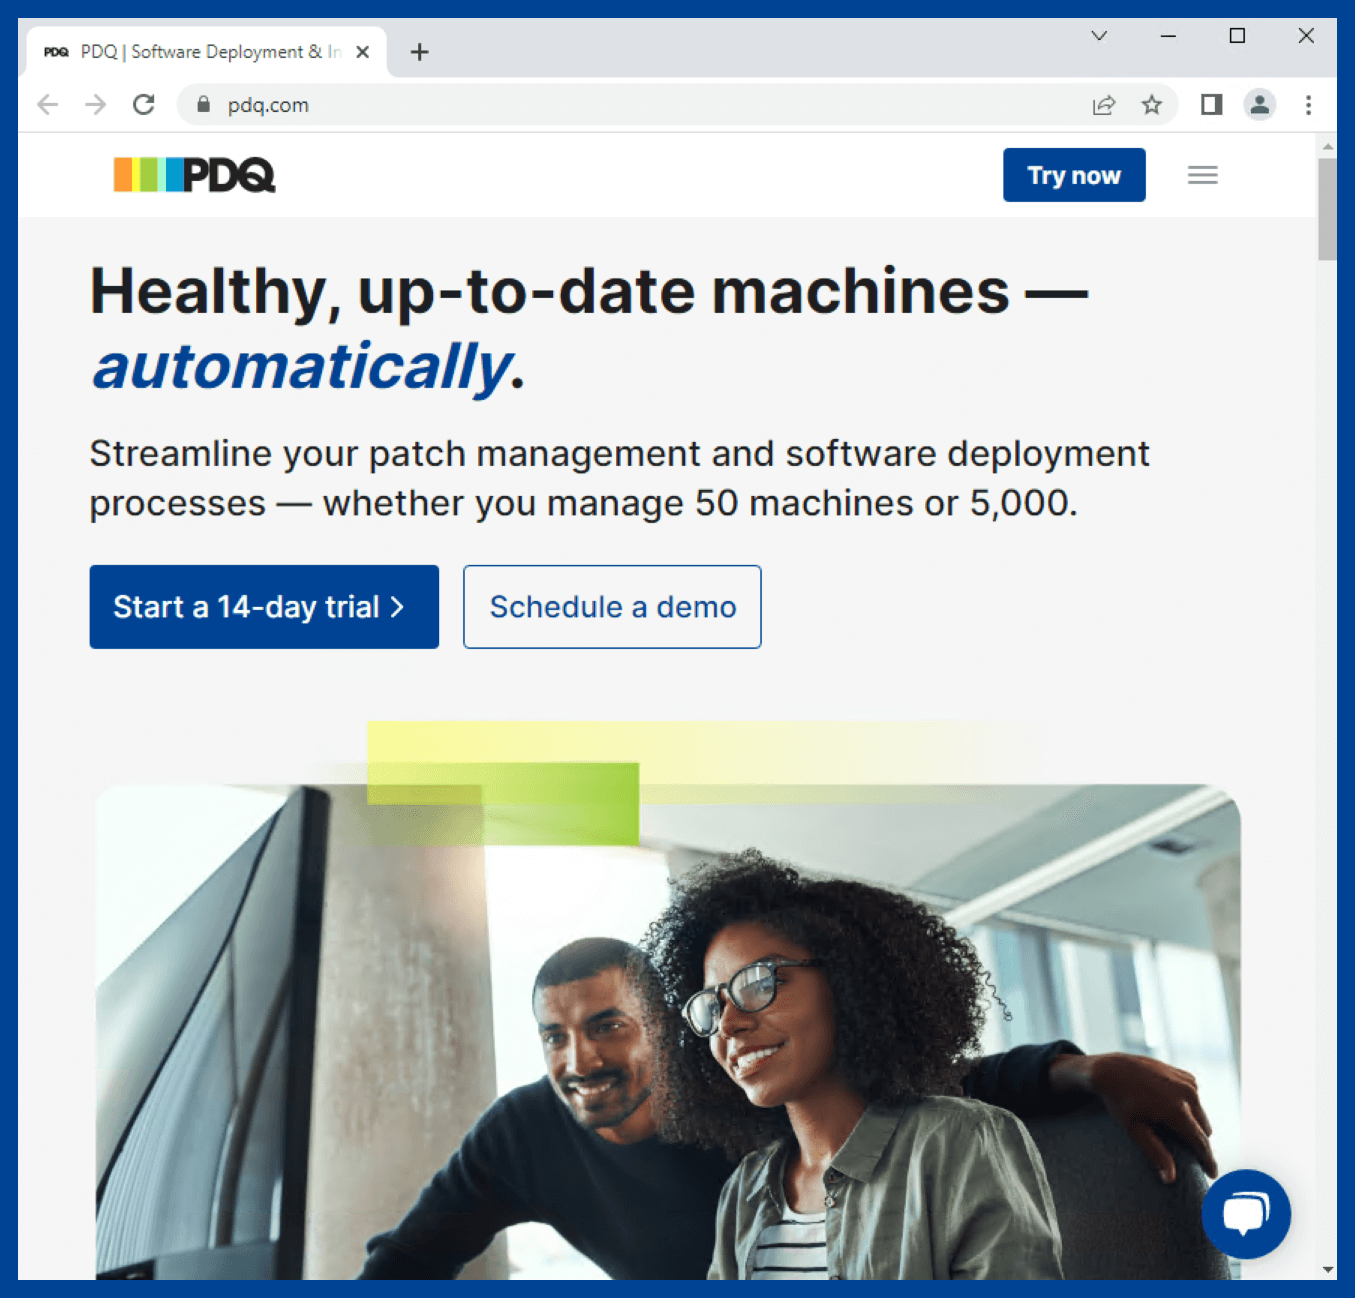 When you launch Chrome, the URL you configure should open, in this case the PDQ homepage